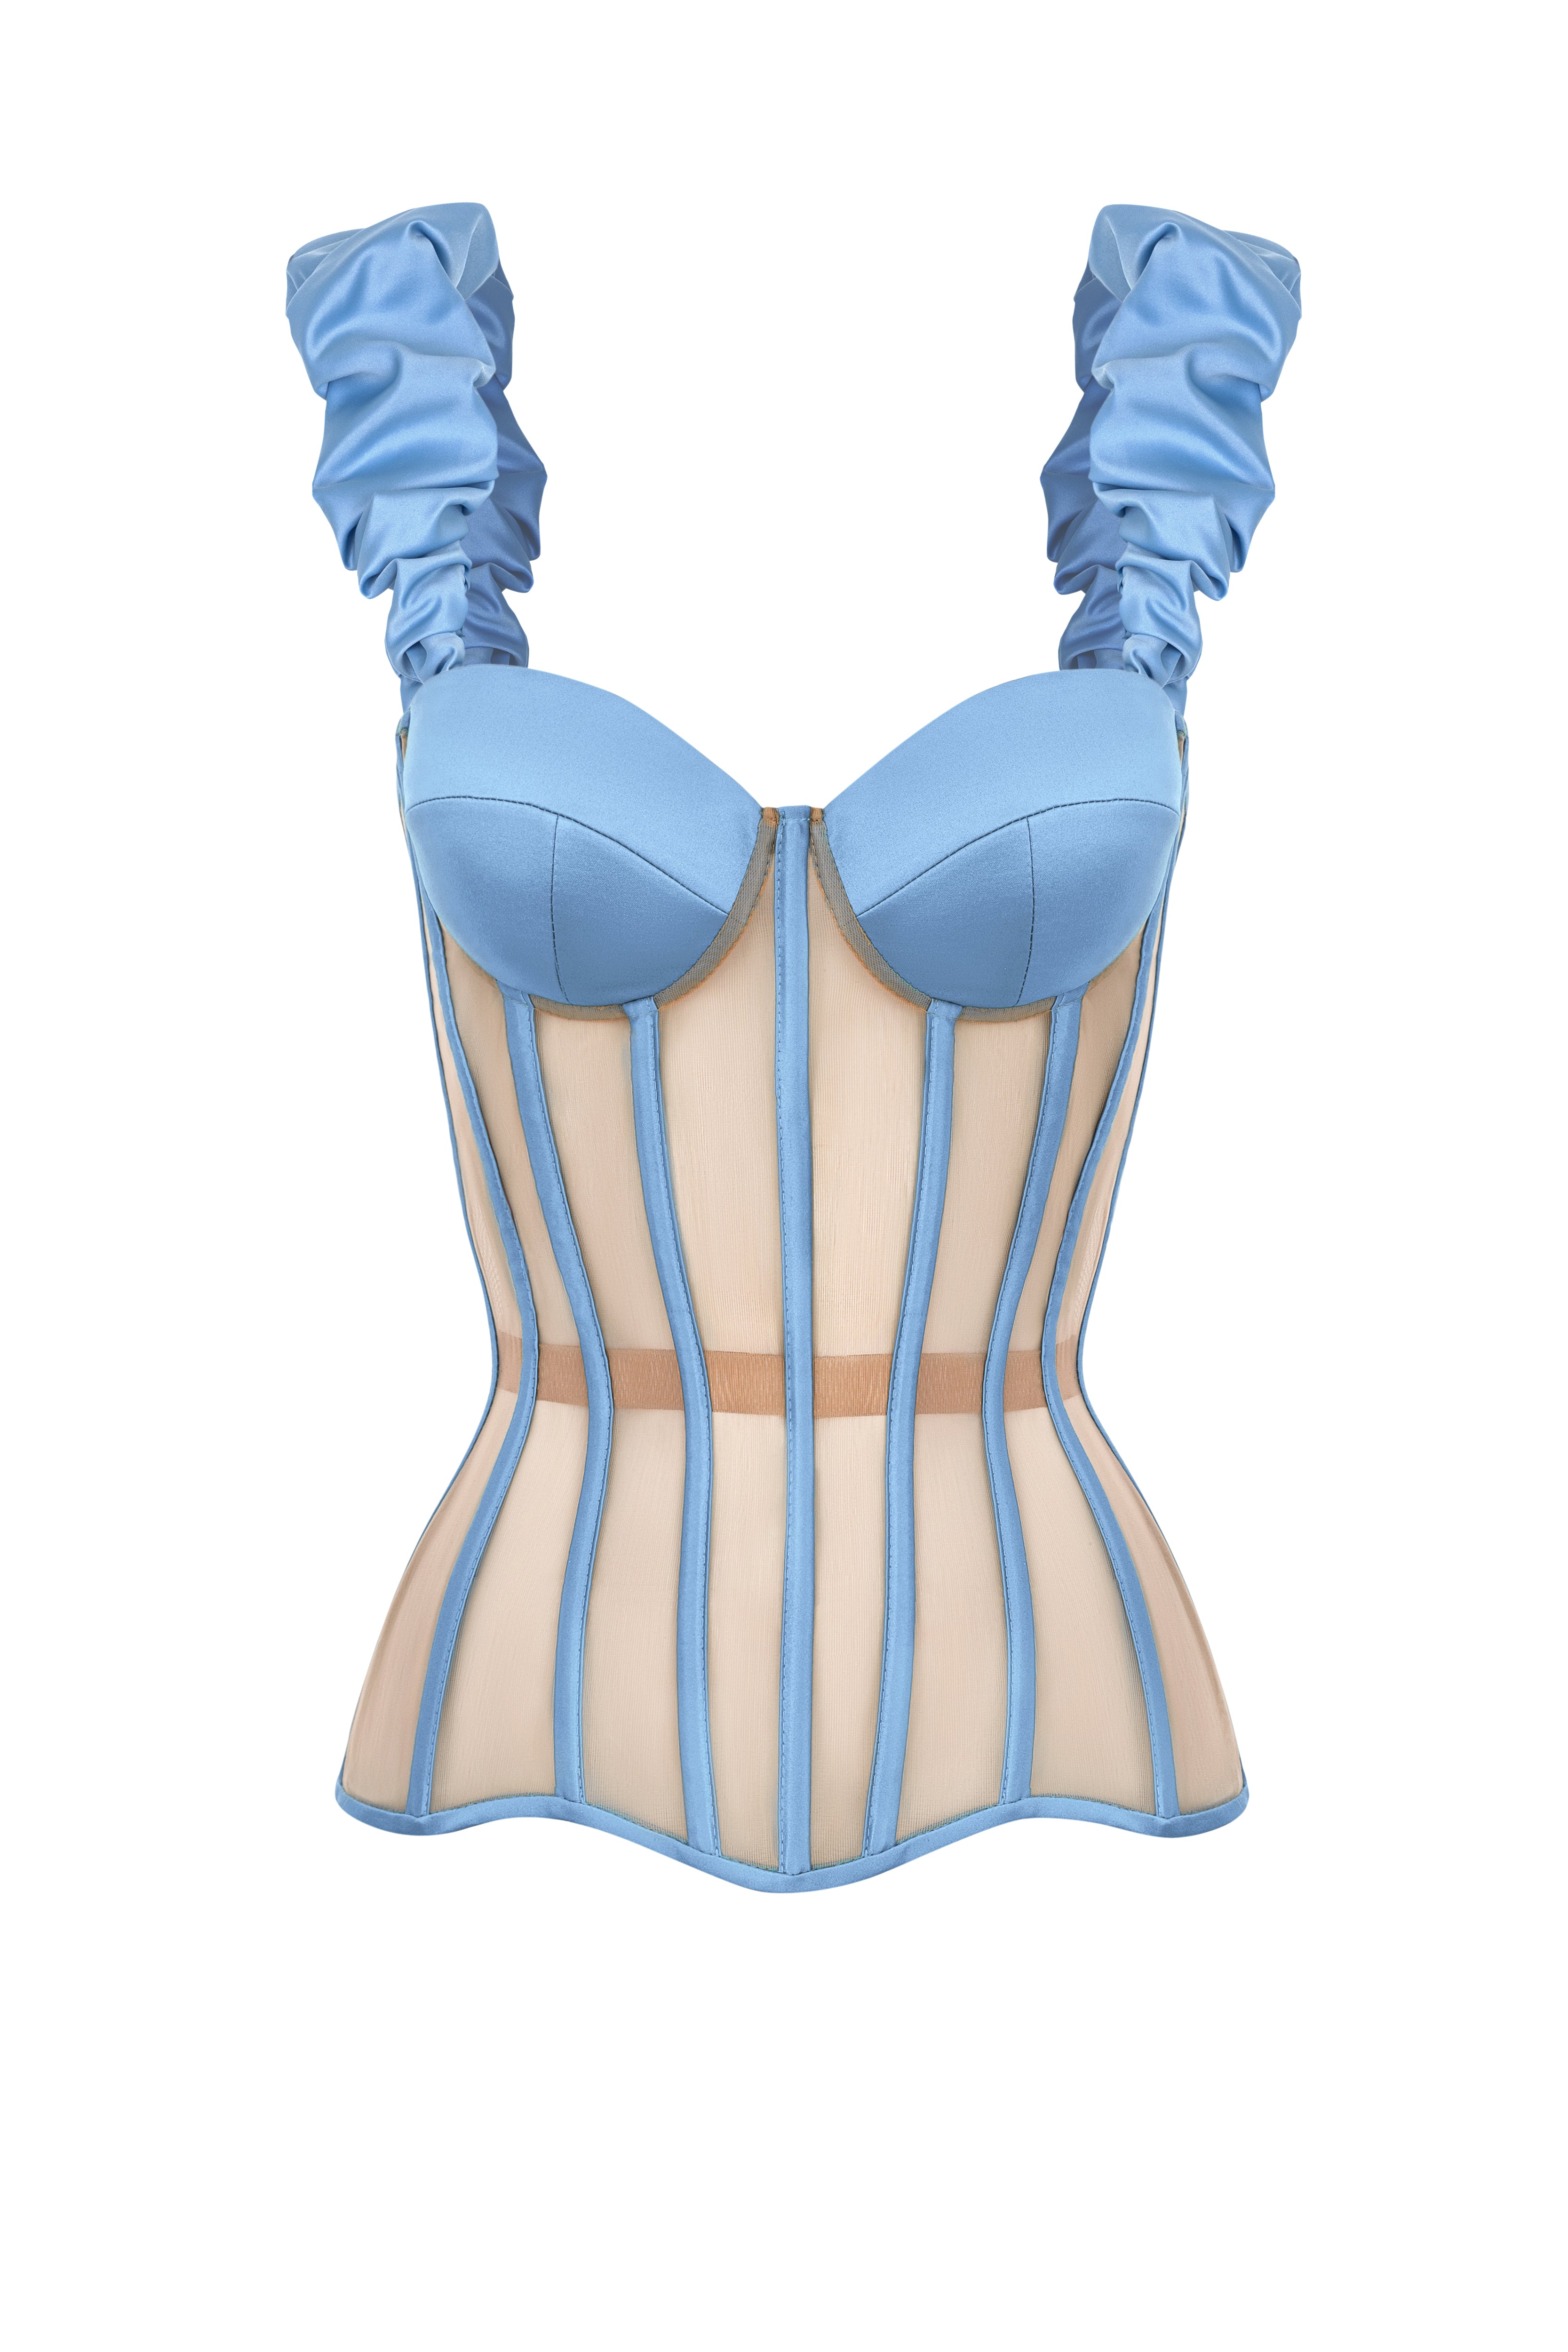 Off white corset with cups - STATNAIA